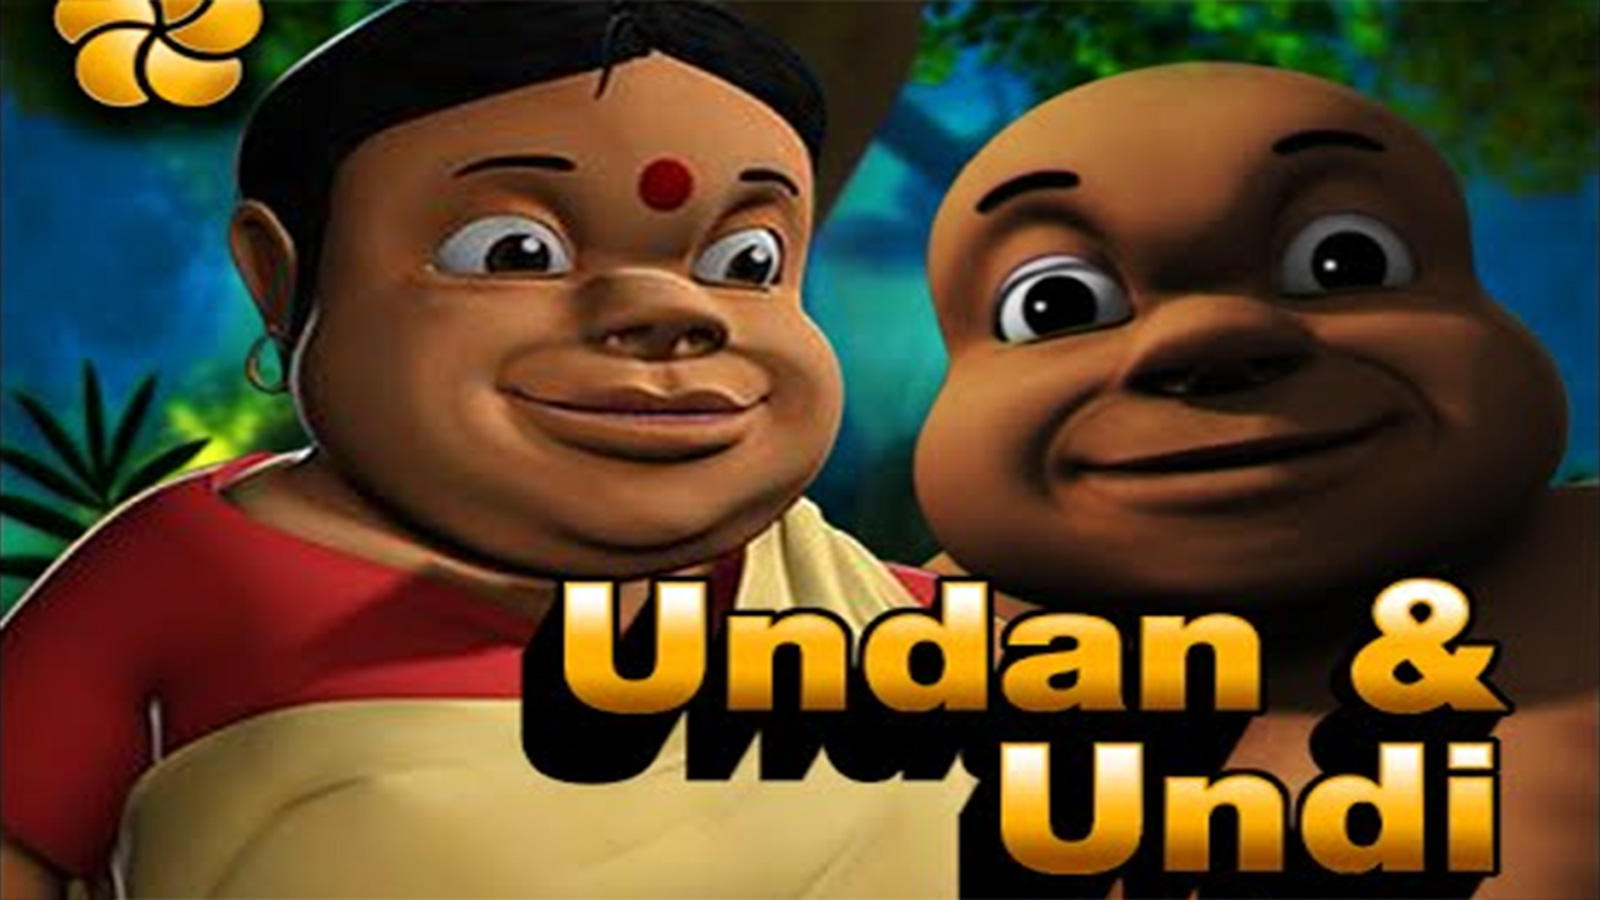 Popular Kids Songs and Malayalam Nursery Story 'Undan & Undi' for Kids -  Check out Children's Nursery Rhymes, Baby Songs, Fairy Tales In Malayalam |  Entertainment - Times of India Videos